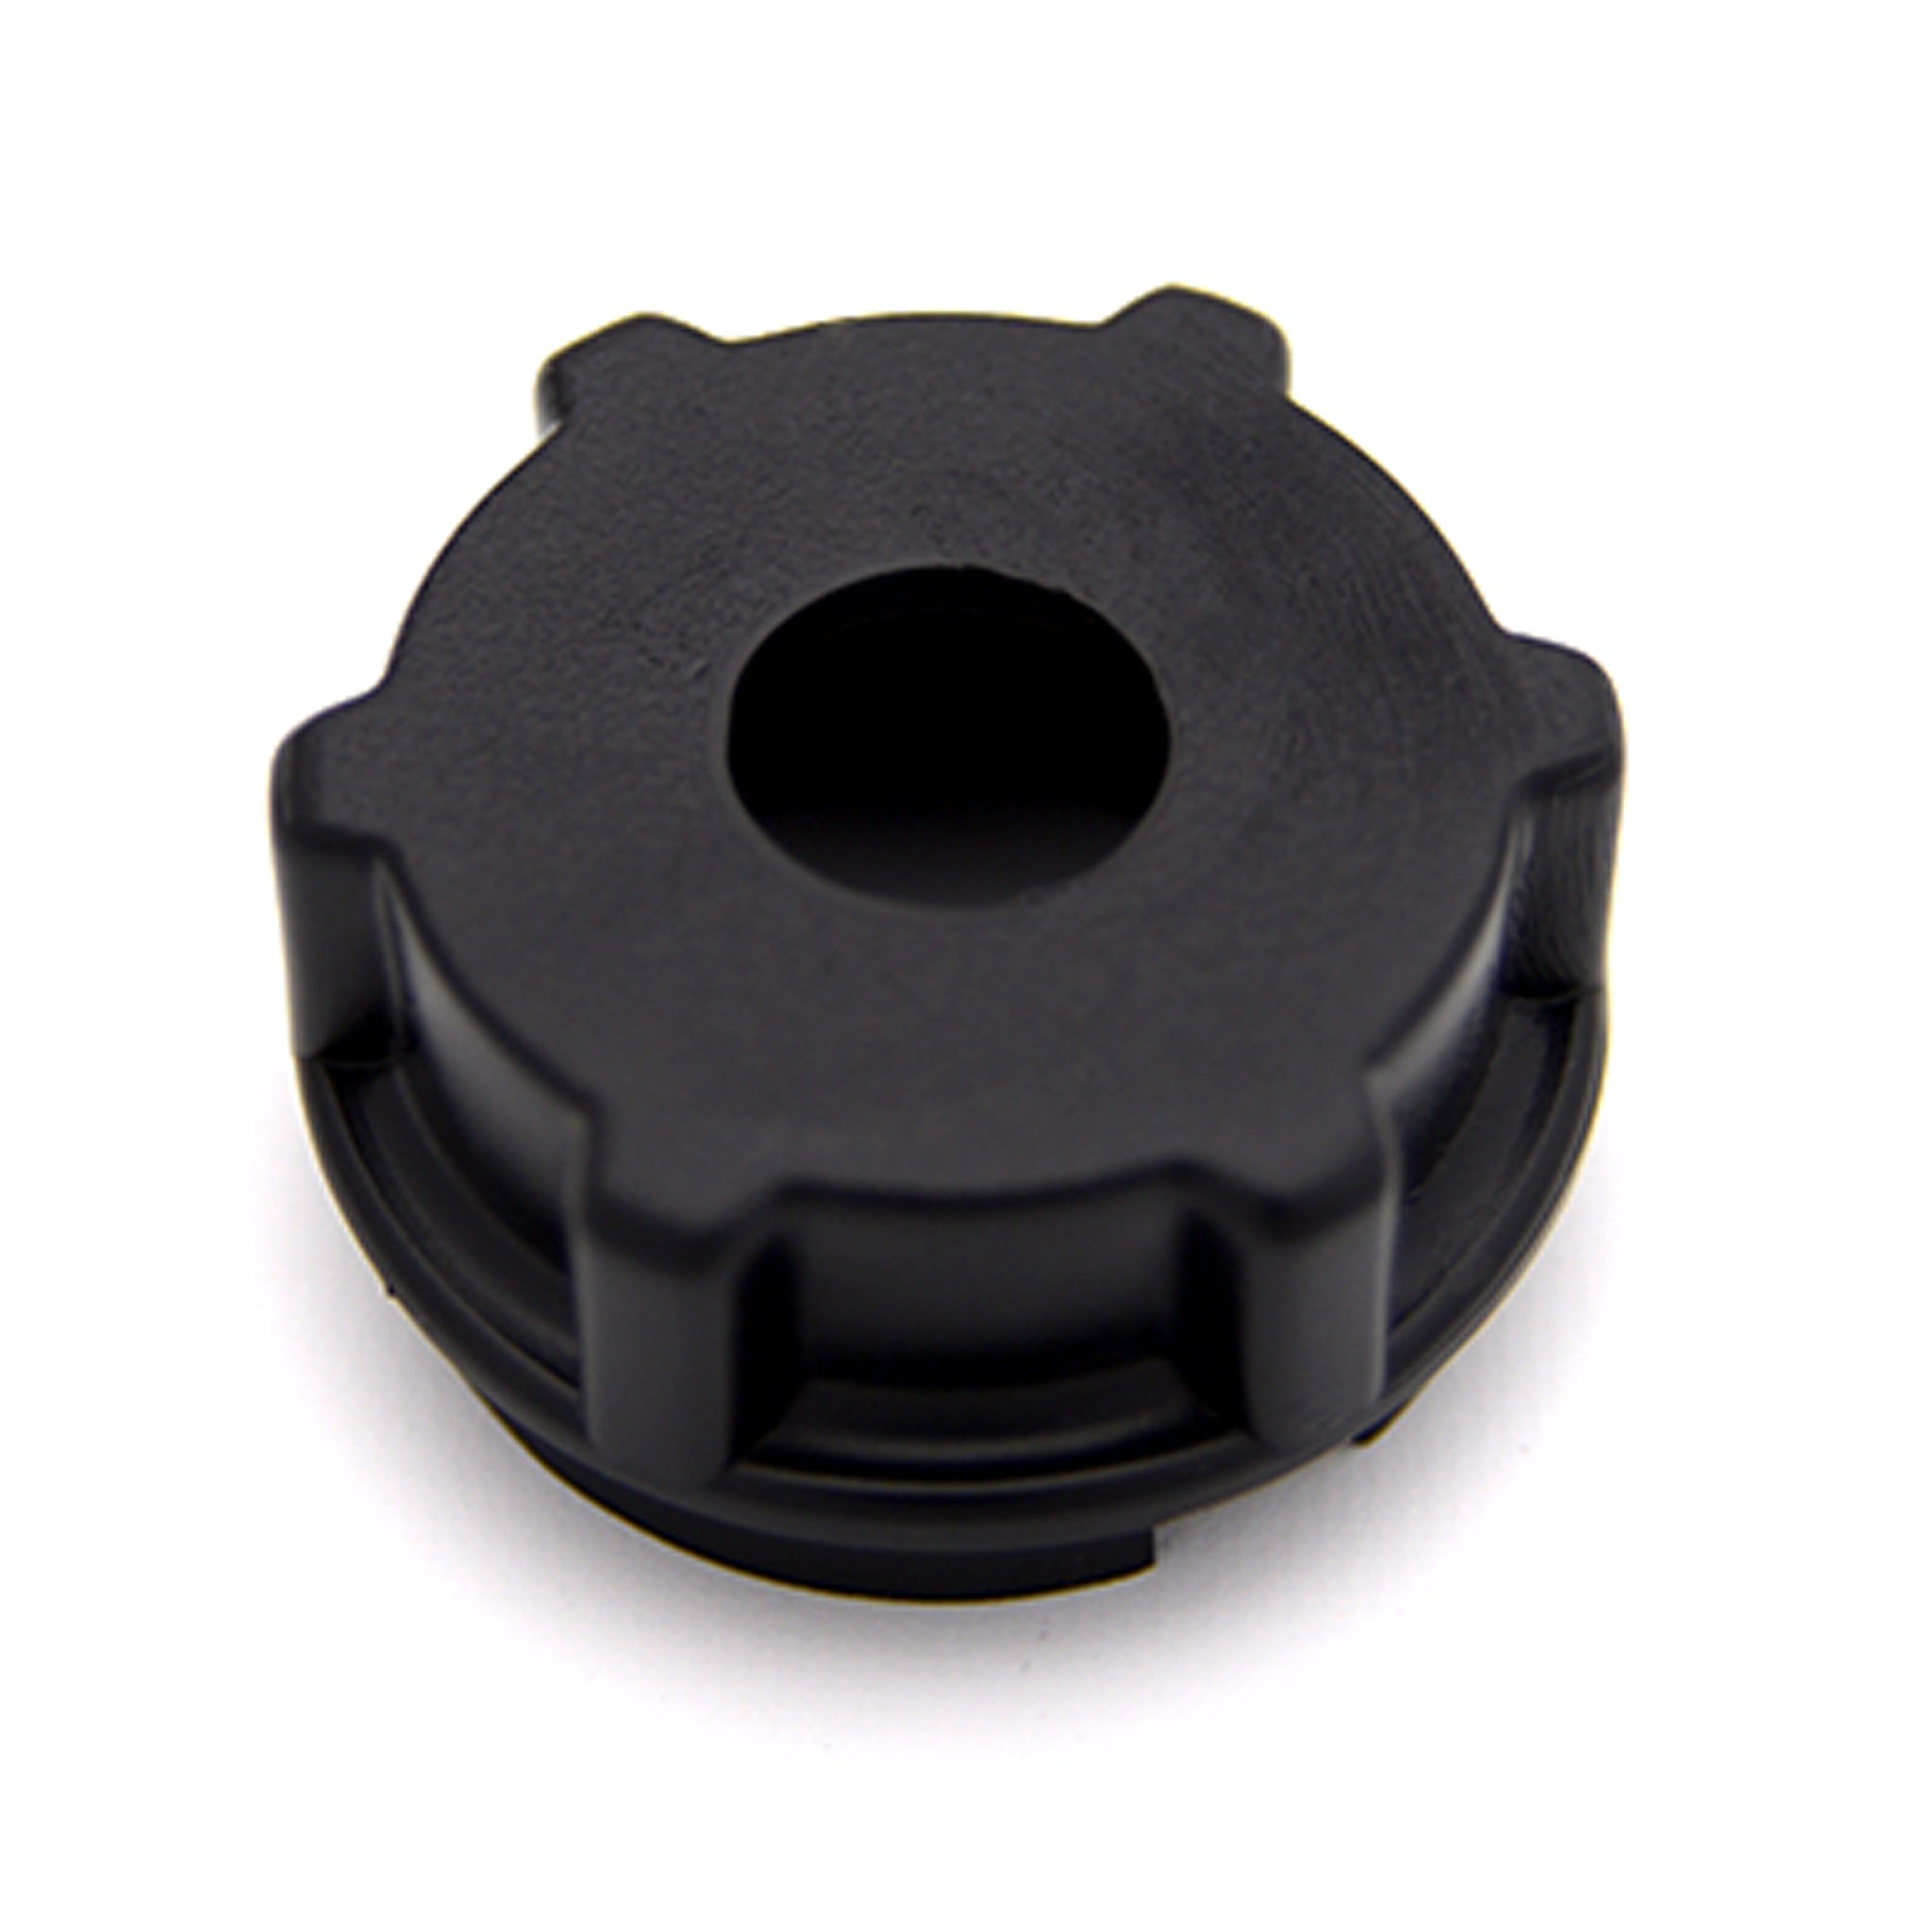 Juicing Nozzle replacement for your Solostar® Juicer.